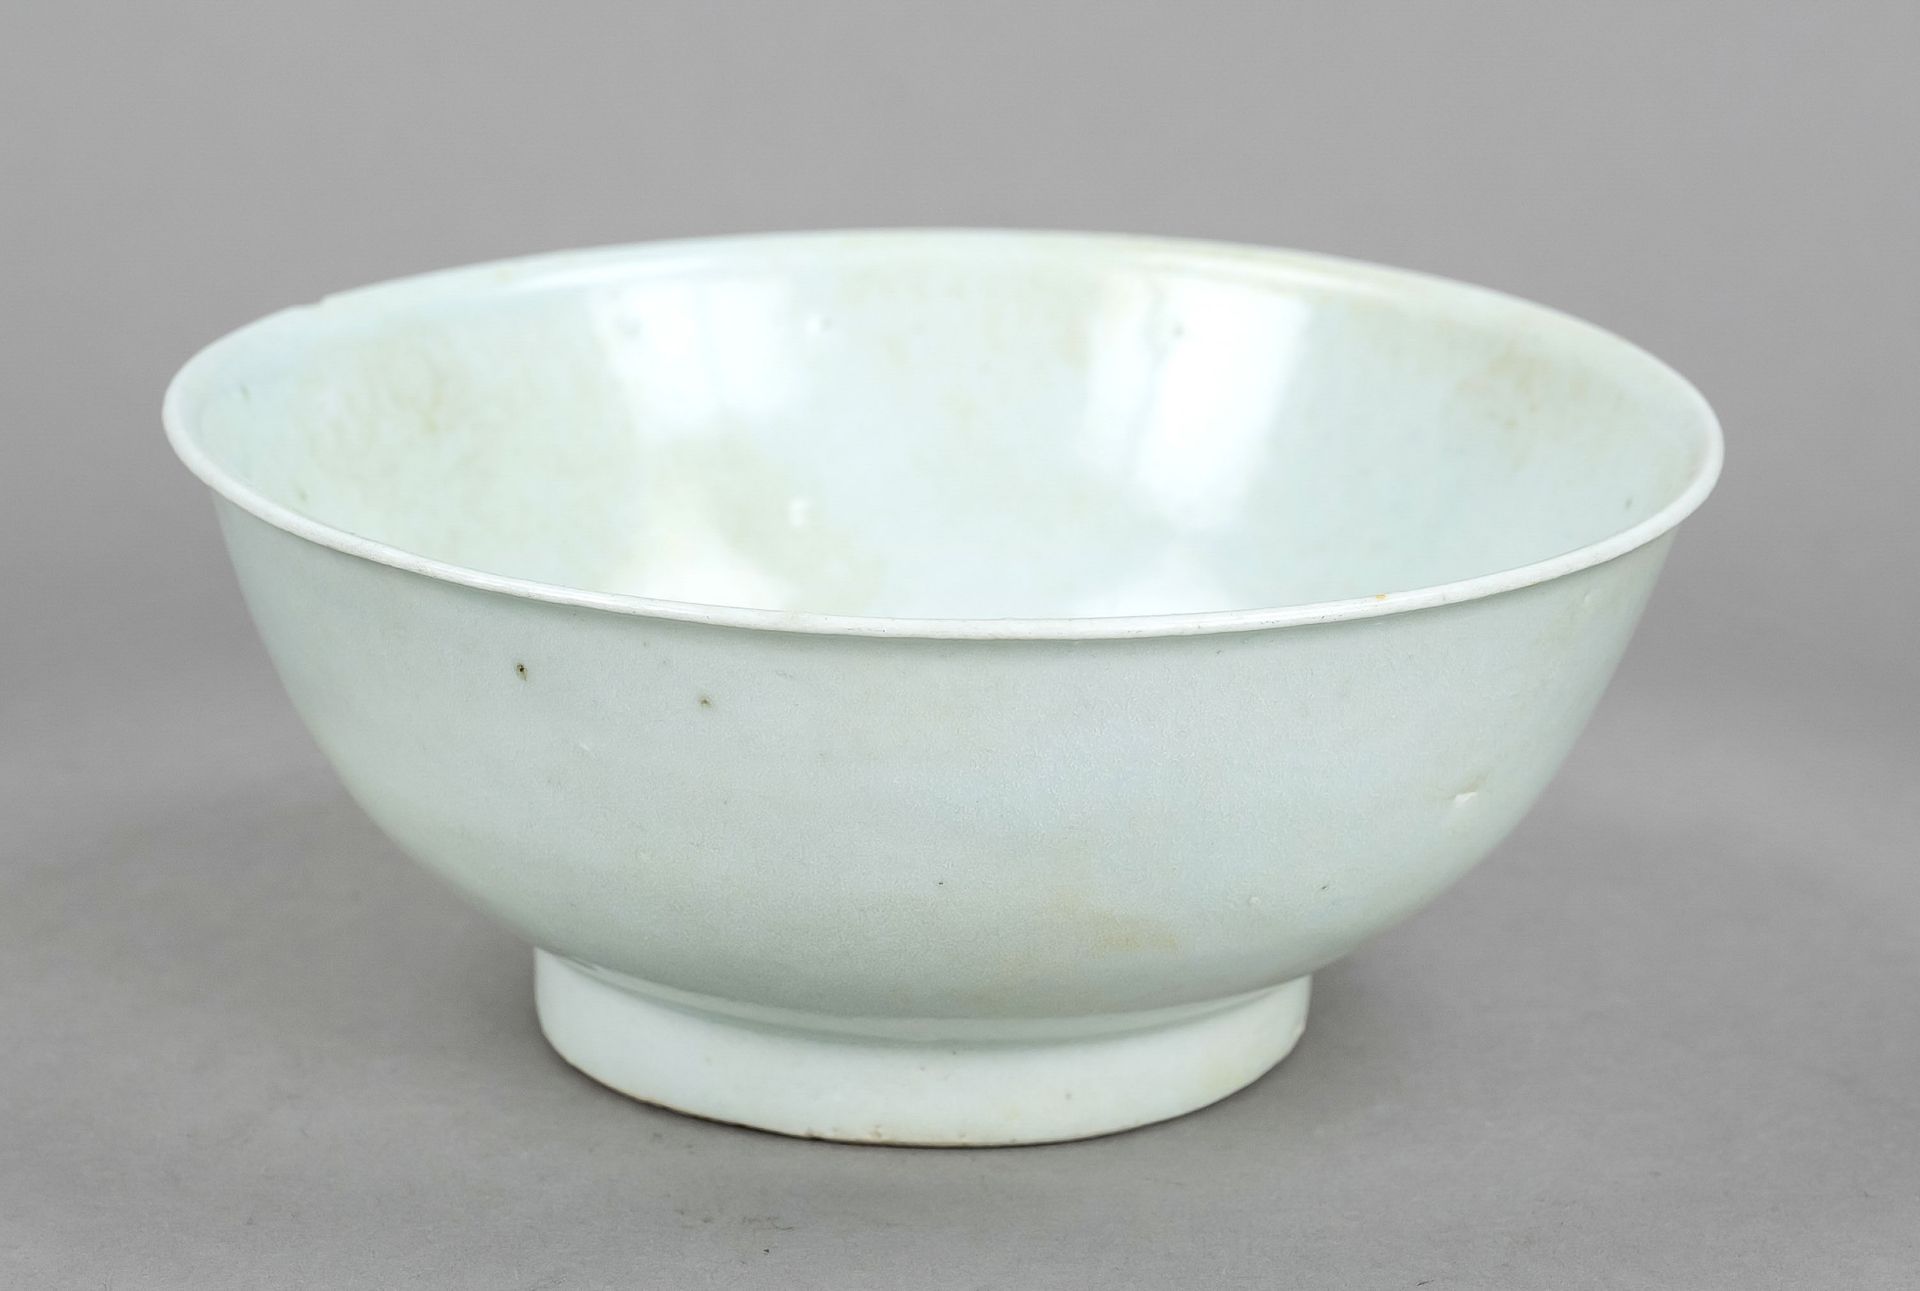 Large food bowl, China, Ming dynasty(1368-1644), 16th/17th century, porcelain with bluish shimmering